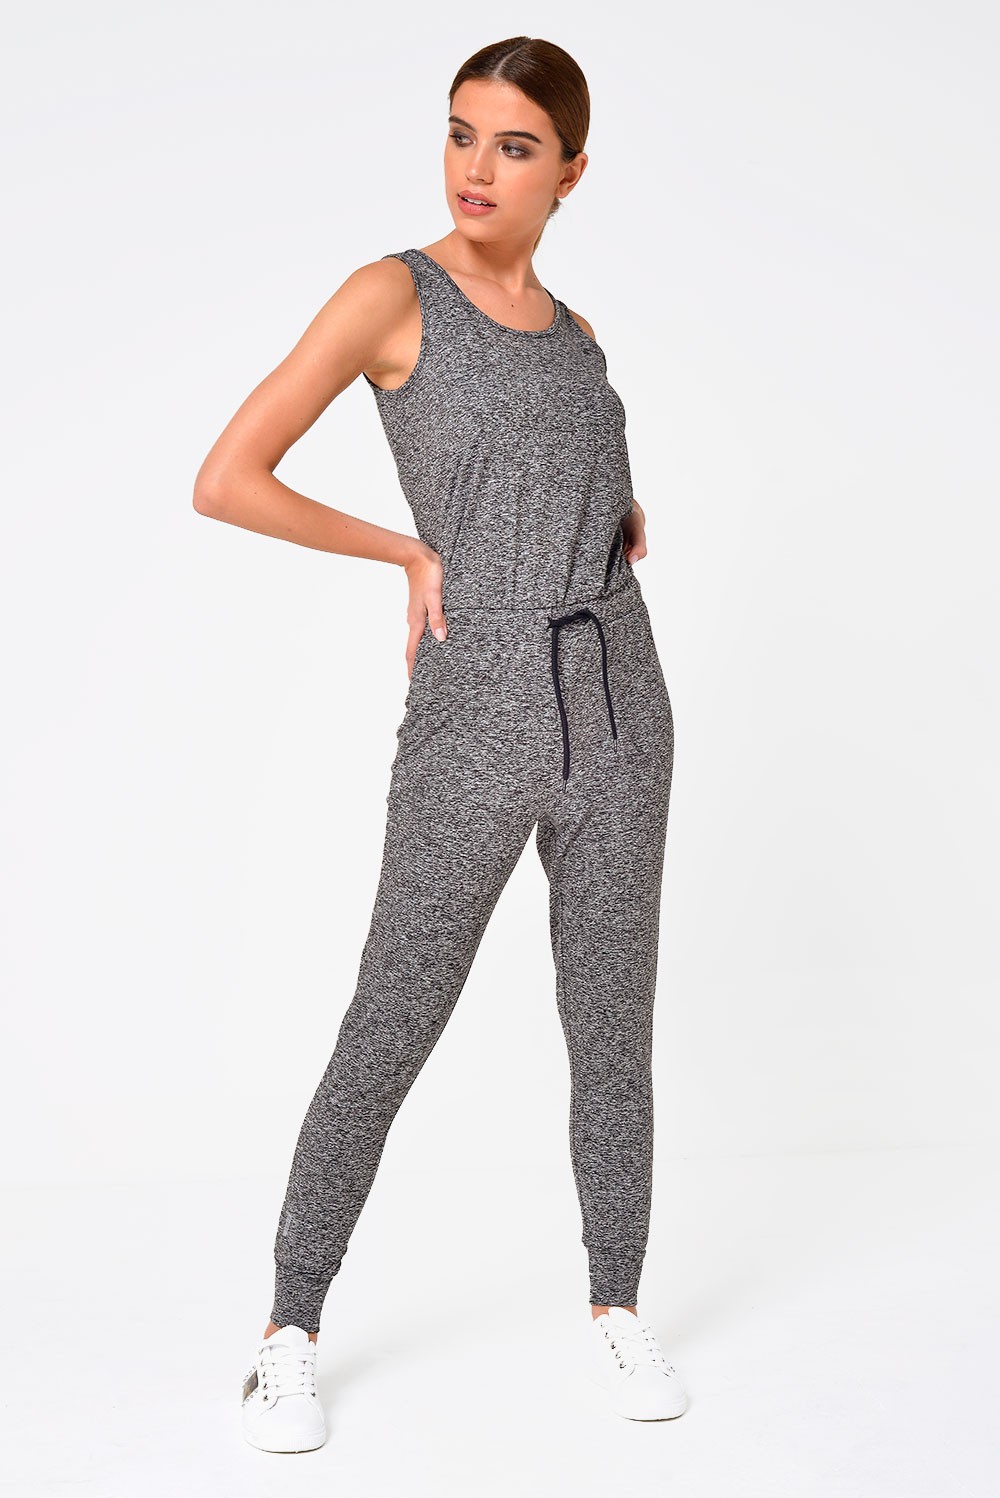 Only Chill Yoga Jumpsuit | iCLOTHING